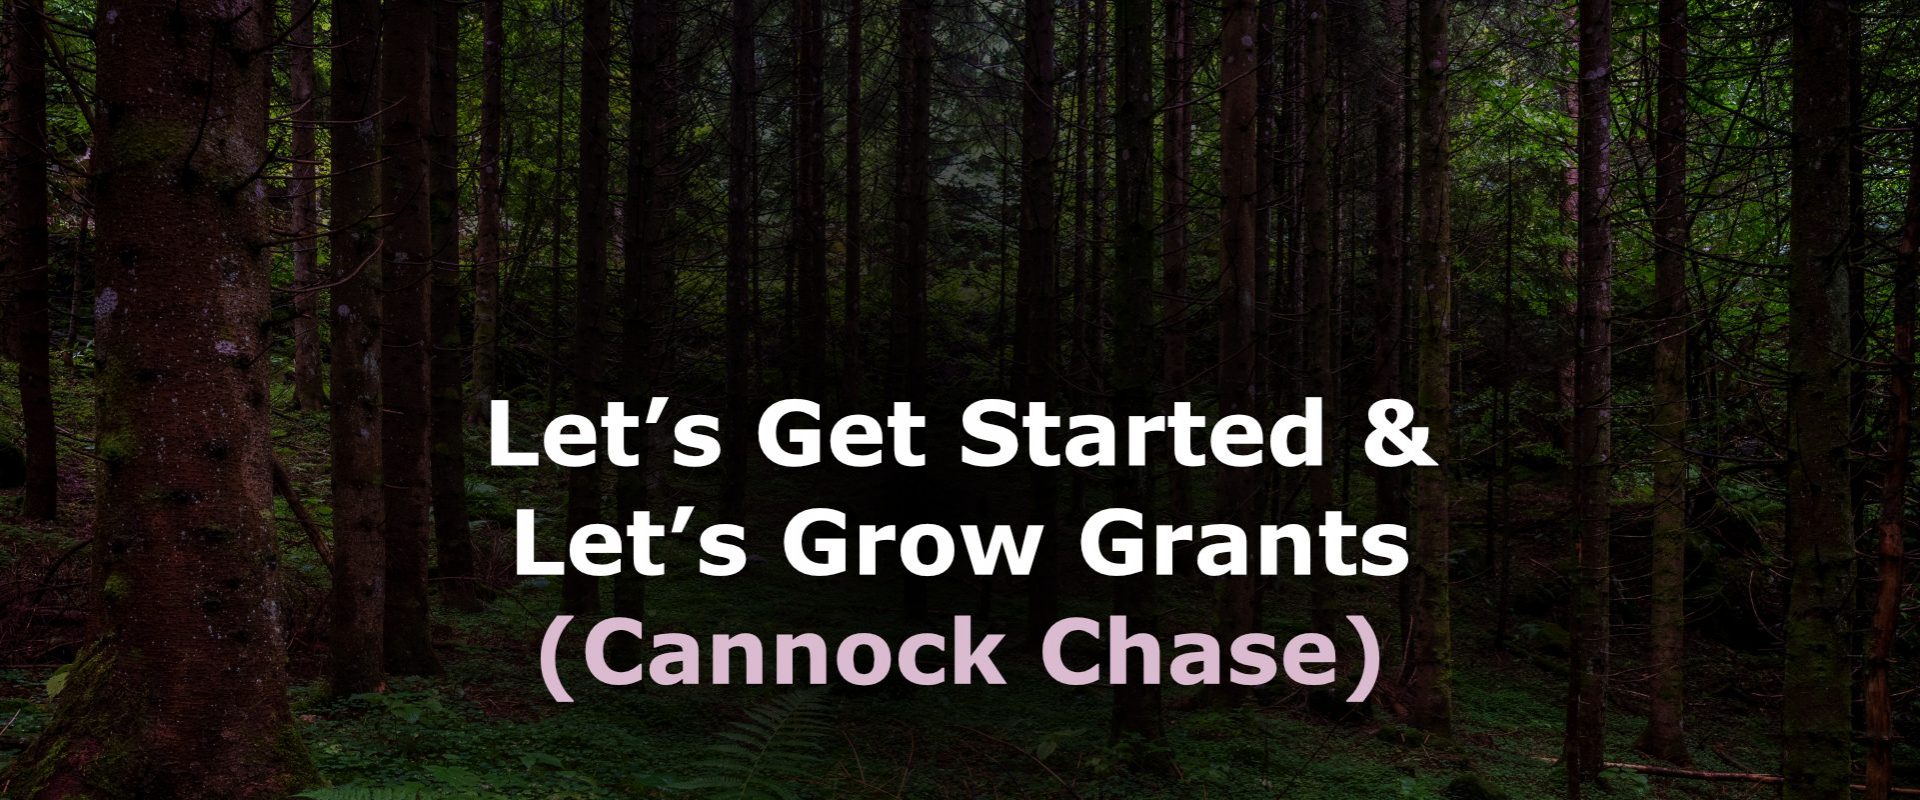 Let’s Get Started and Let’s Grow Grants (Cannock Chase)